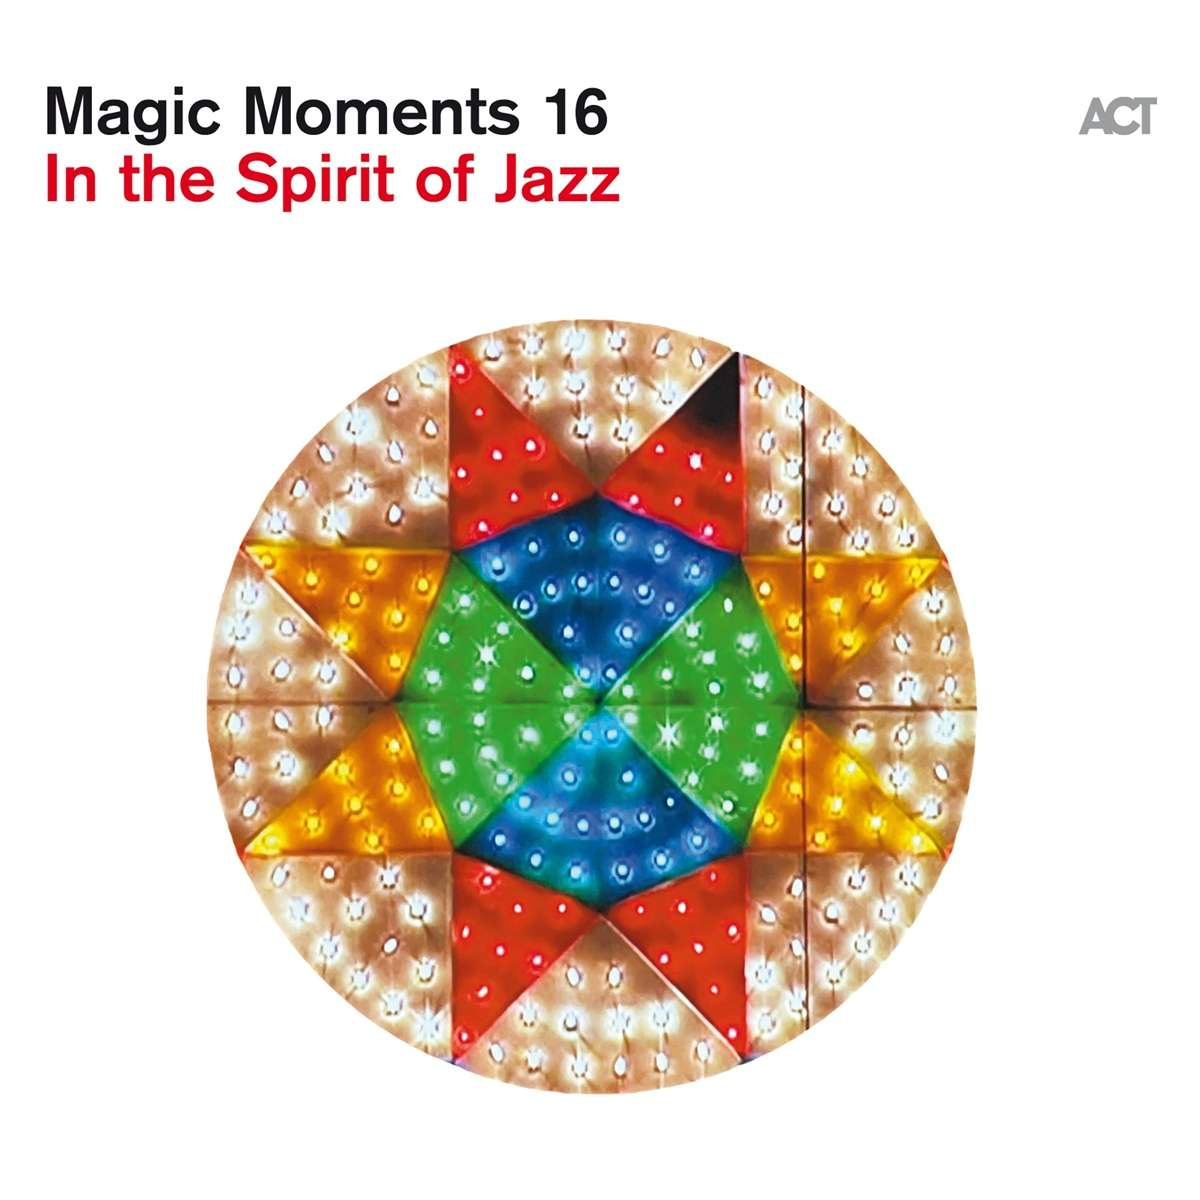 MAGIC MOMENTS 16 - IN THE SPIRIT OF JAZZ